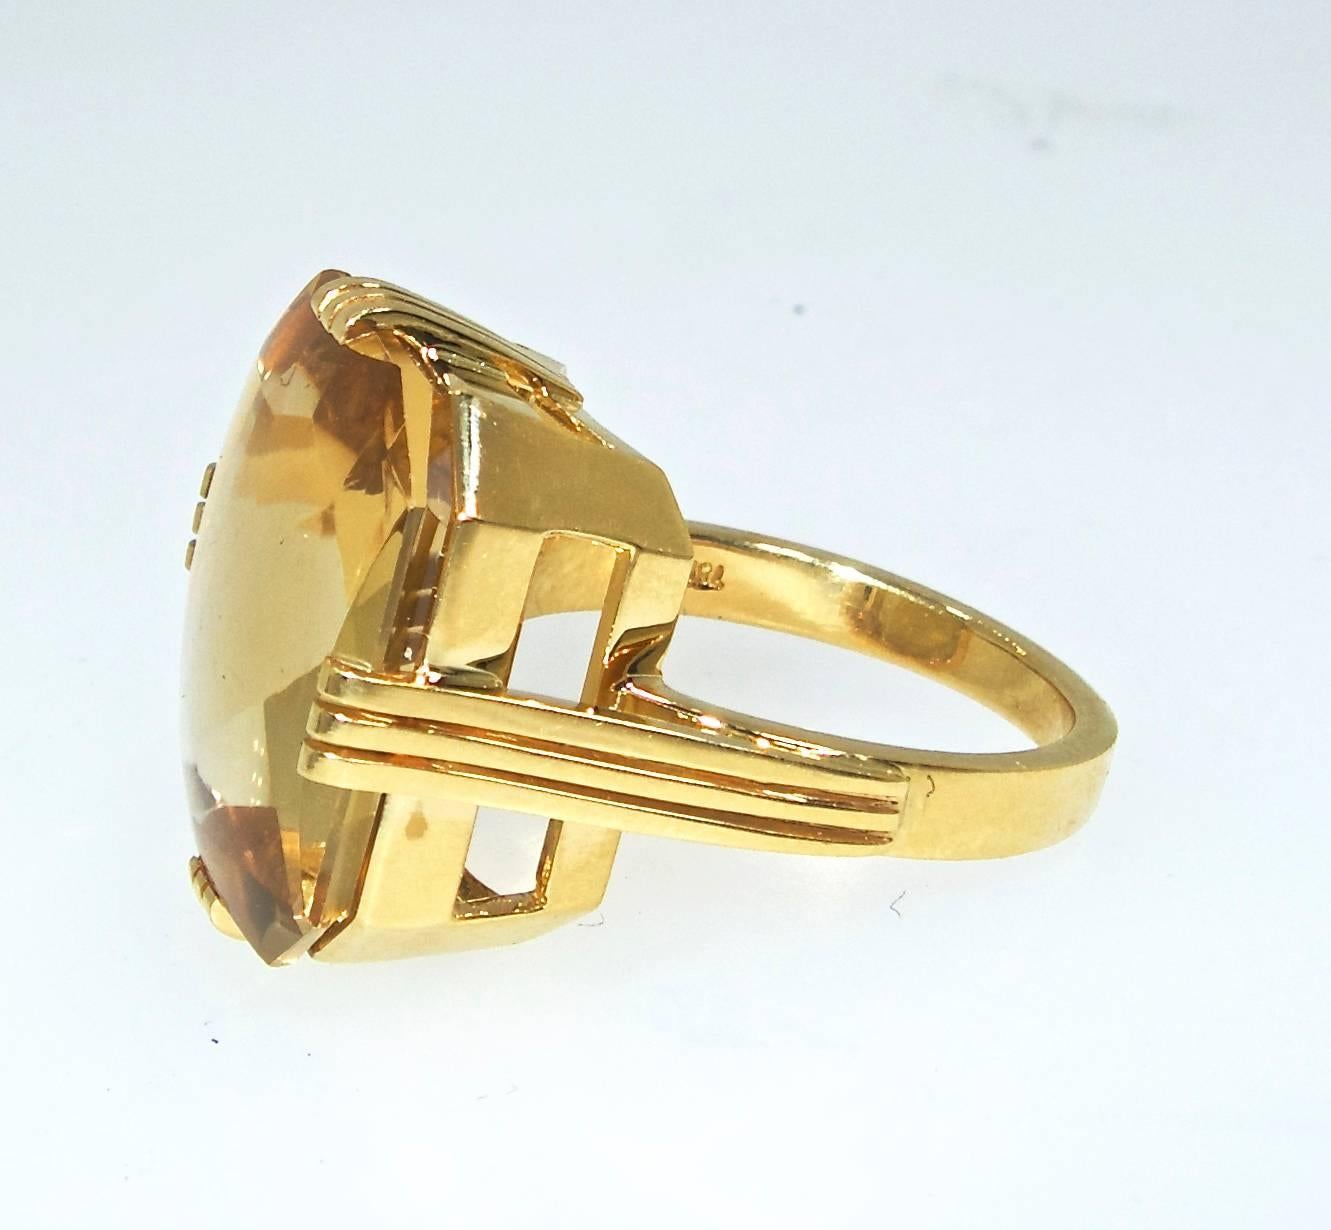 Set in 18K yellow gold the stone weighs approximately 12 cts., this geometric ring was found in absolutely unused condition.  The clipped cornered emerald cut with a buff top and a facetted bottom sits in a mounting of chiseled precision. The